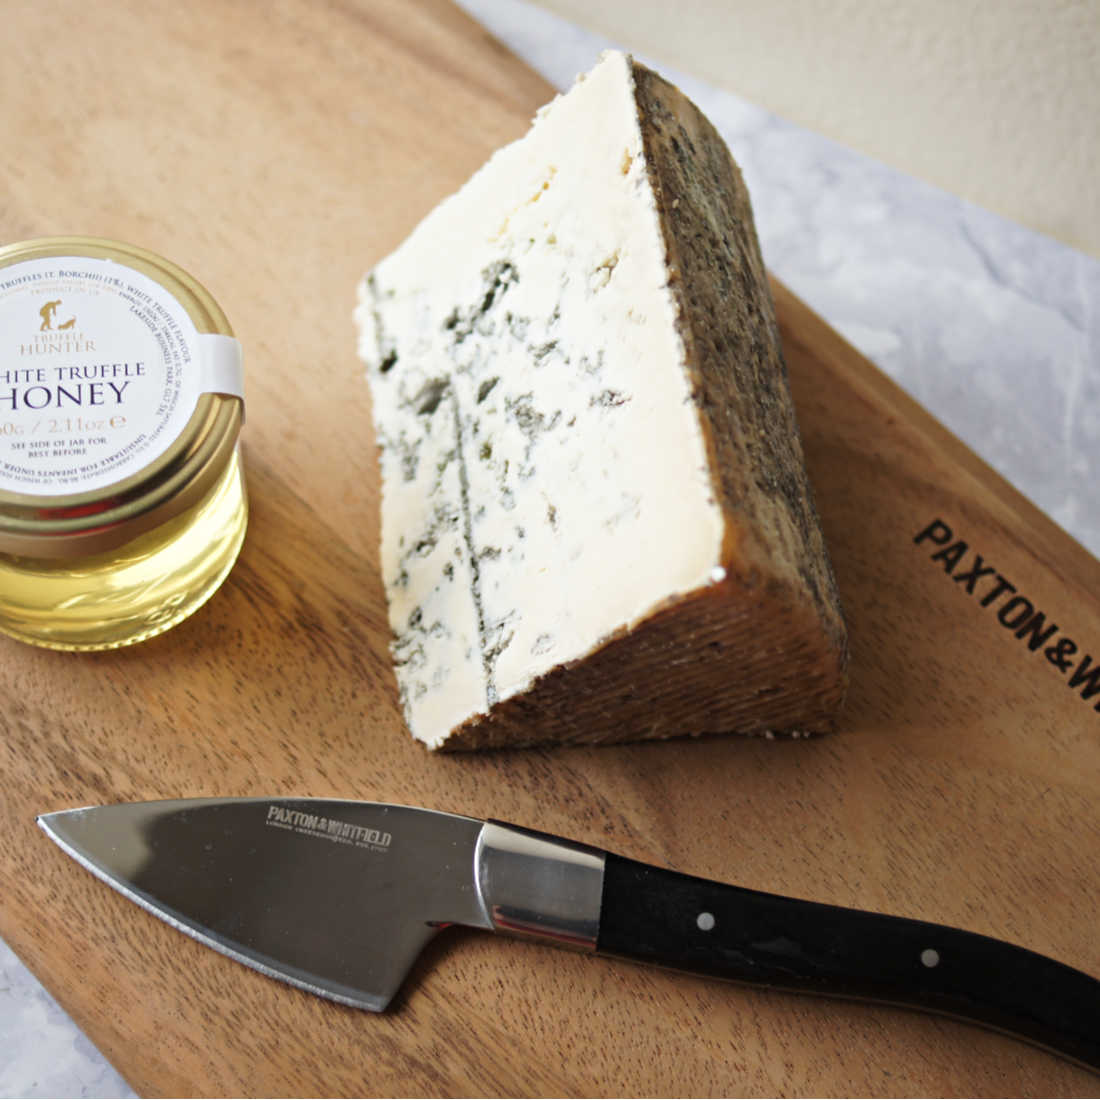 Crozier-Blue-and-Truffle-Honey-Low-Res-Square